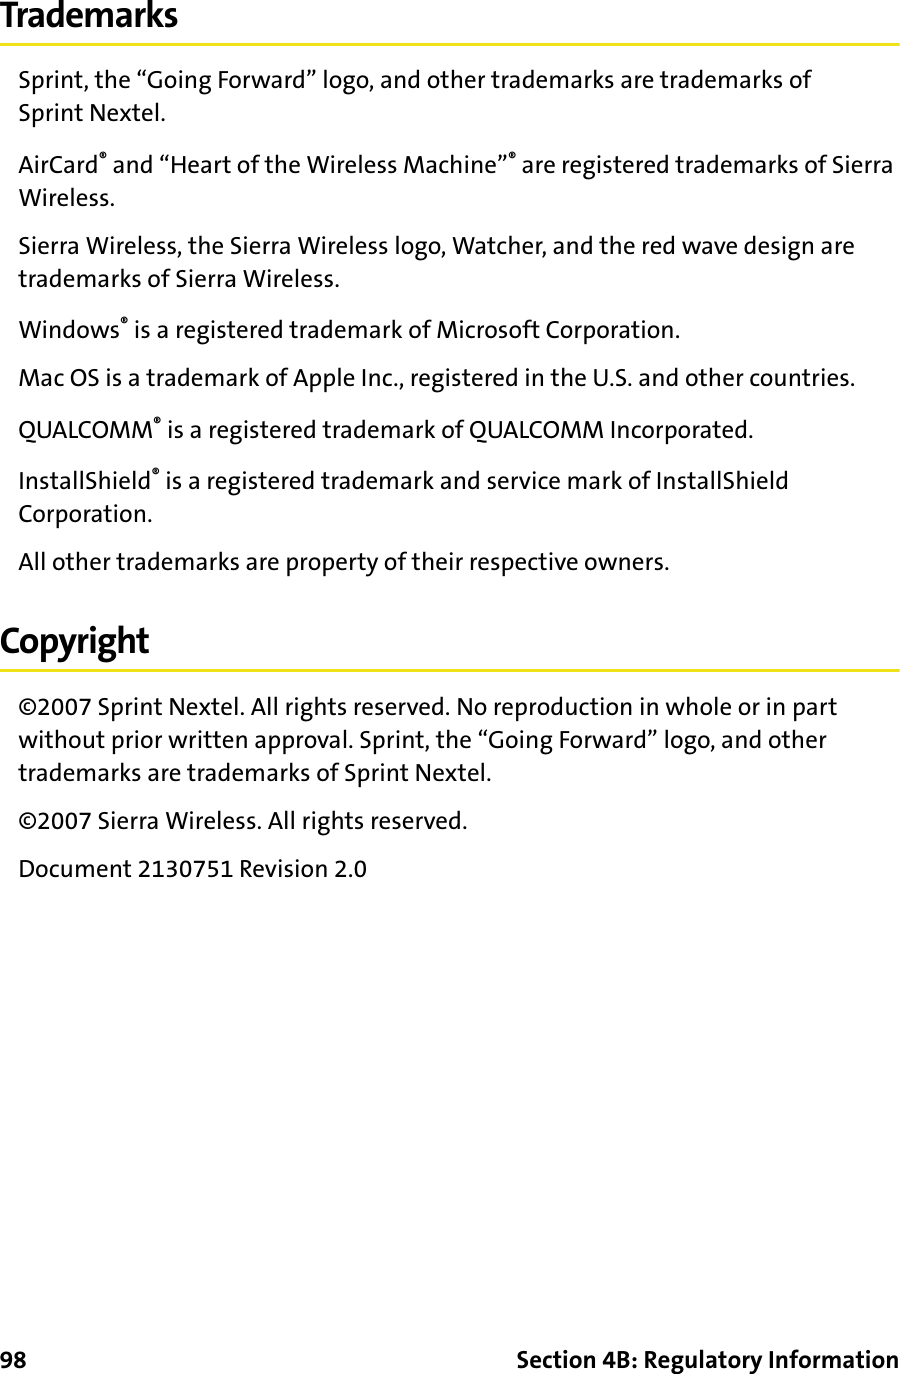 98 Section 4B: Regulatory InformationTrademarksSprint, the “Going Forward” logo, and other trademarks are trademarks of Sprint Nextel. AirCard® and “Heart of the Wireless Machine”® are registered trademarks of Sierra Wireless.Sierra Wireless, the Sierra Wireless logo, Watcher, and the red wave design are trademarks of Sierra Wireless.Windows® is a registered trademark of Microsoft Corporation.Mac OS is a trademark of Apple Inc., registered in the U.S. and other countries.QUALCOMM® is a registered trademark of QUALCOMM Incorporated.InstallShield® is a registered trademark and service mark of InstallShield Corporation.All other trademarks are property of their respective owners.Copyright©2007 Sprint Nextel. All rights reserved. No reproduction in whole or in part without prior written approval. Sprint, the “Going Forward” logo, and other trademarks are trademarks of Sprint Nextel.©2007 Sierra Wireless. All rights reserved.Document 2130751 Revision 2.0